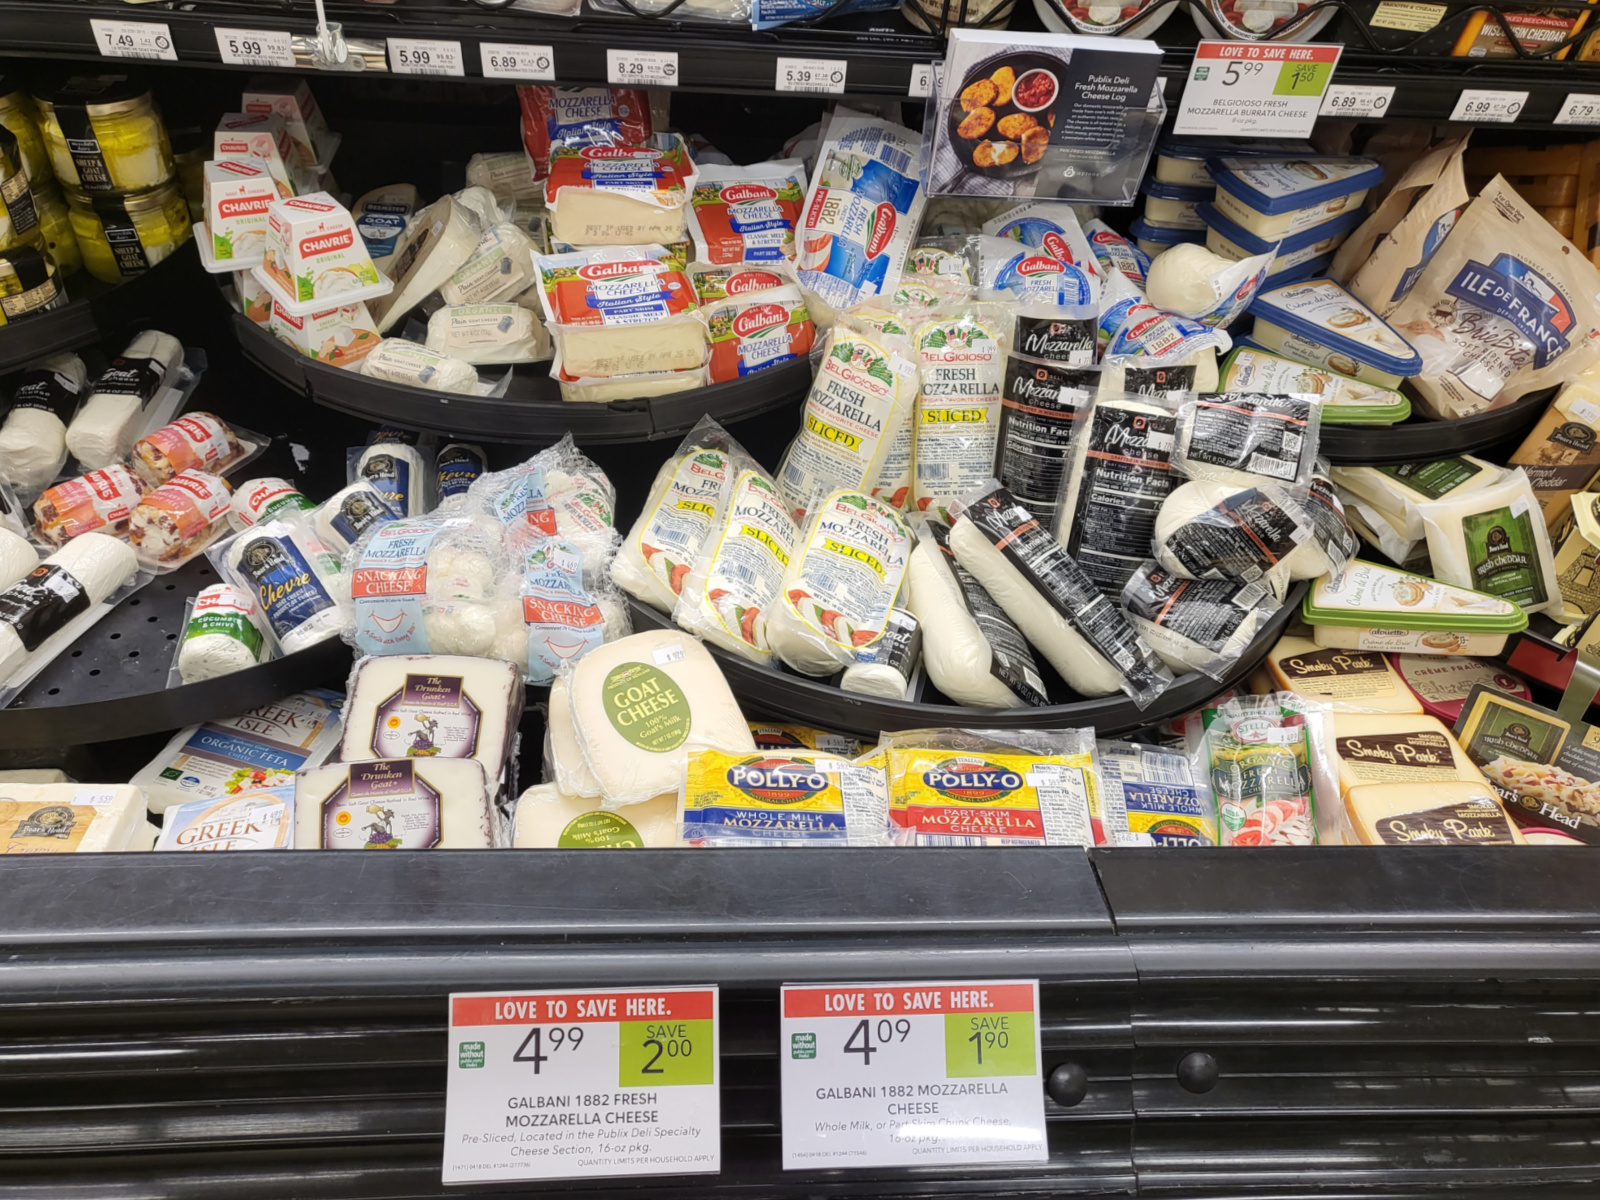 Grab Galbani Mozzarella Cheese As Low As $2.59 At Publix (Regular Price $5.99) on I Heart Publix